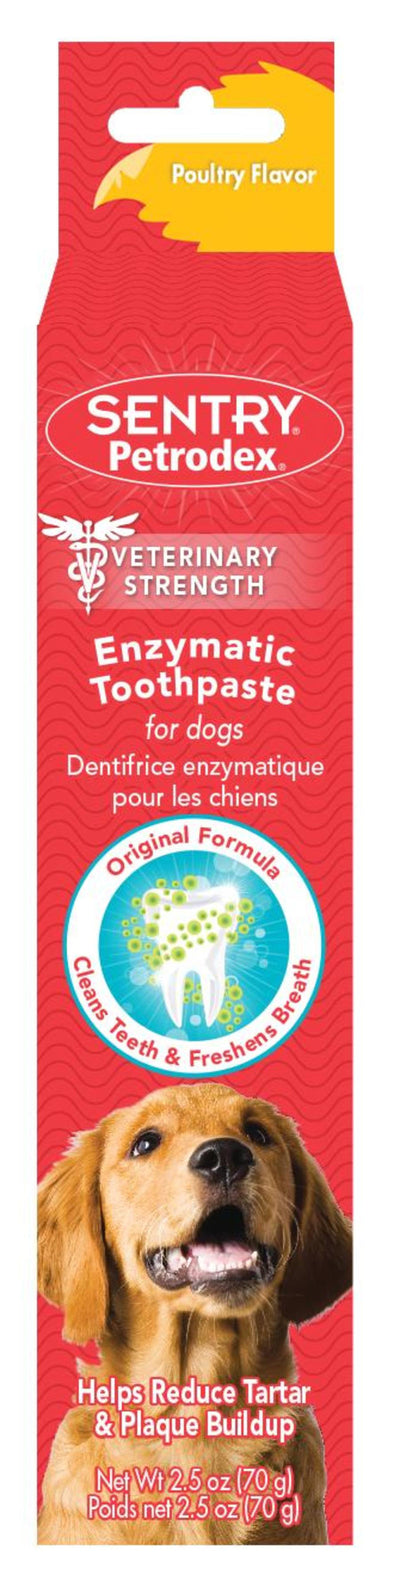 SENTRY Petrodex Enzymatic Toothpaste for Dogs 1ea/2.5 oz